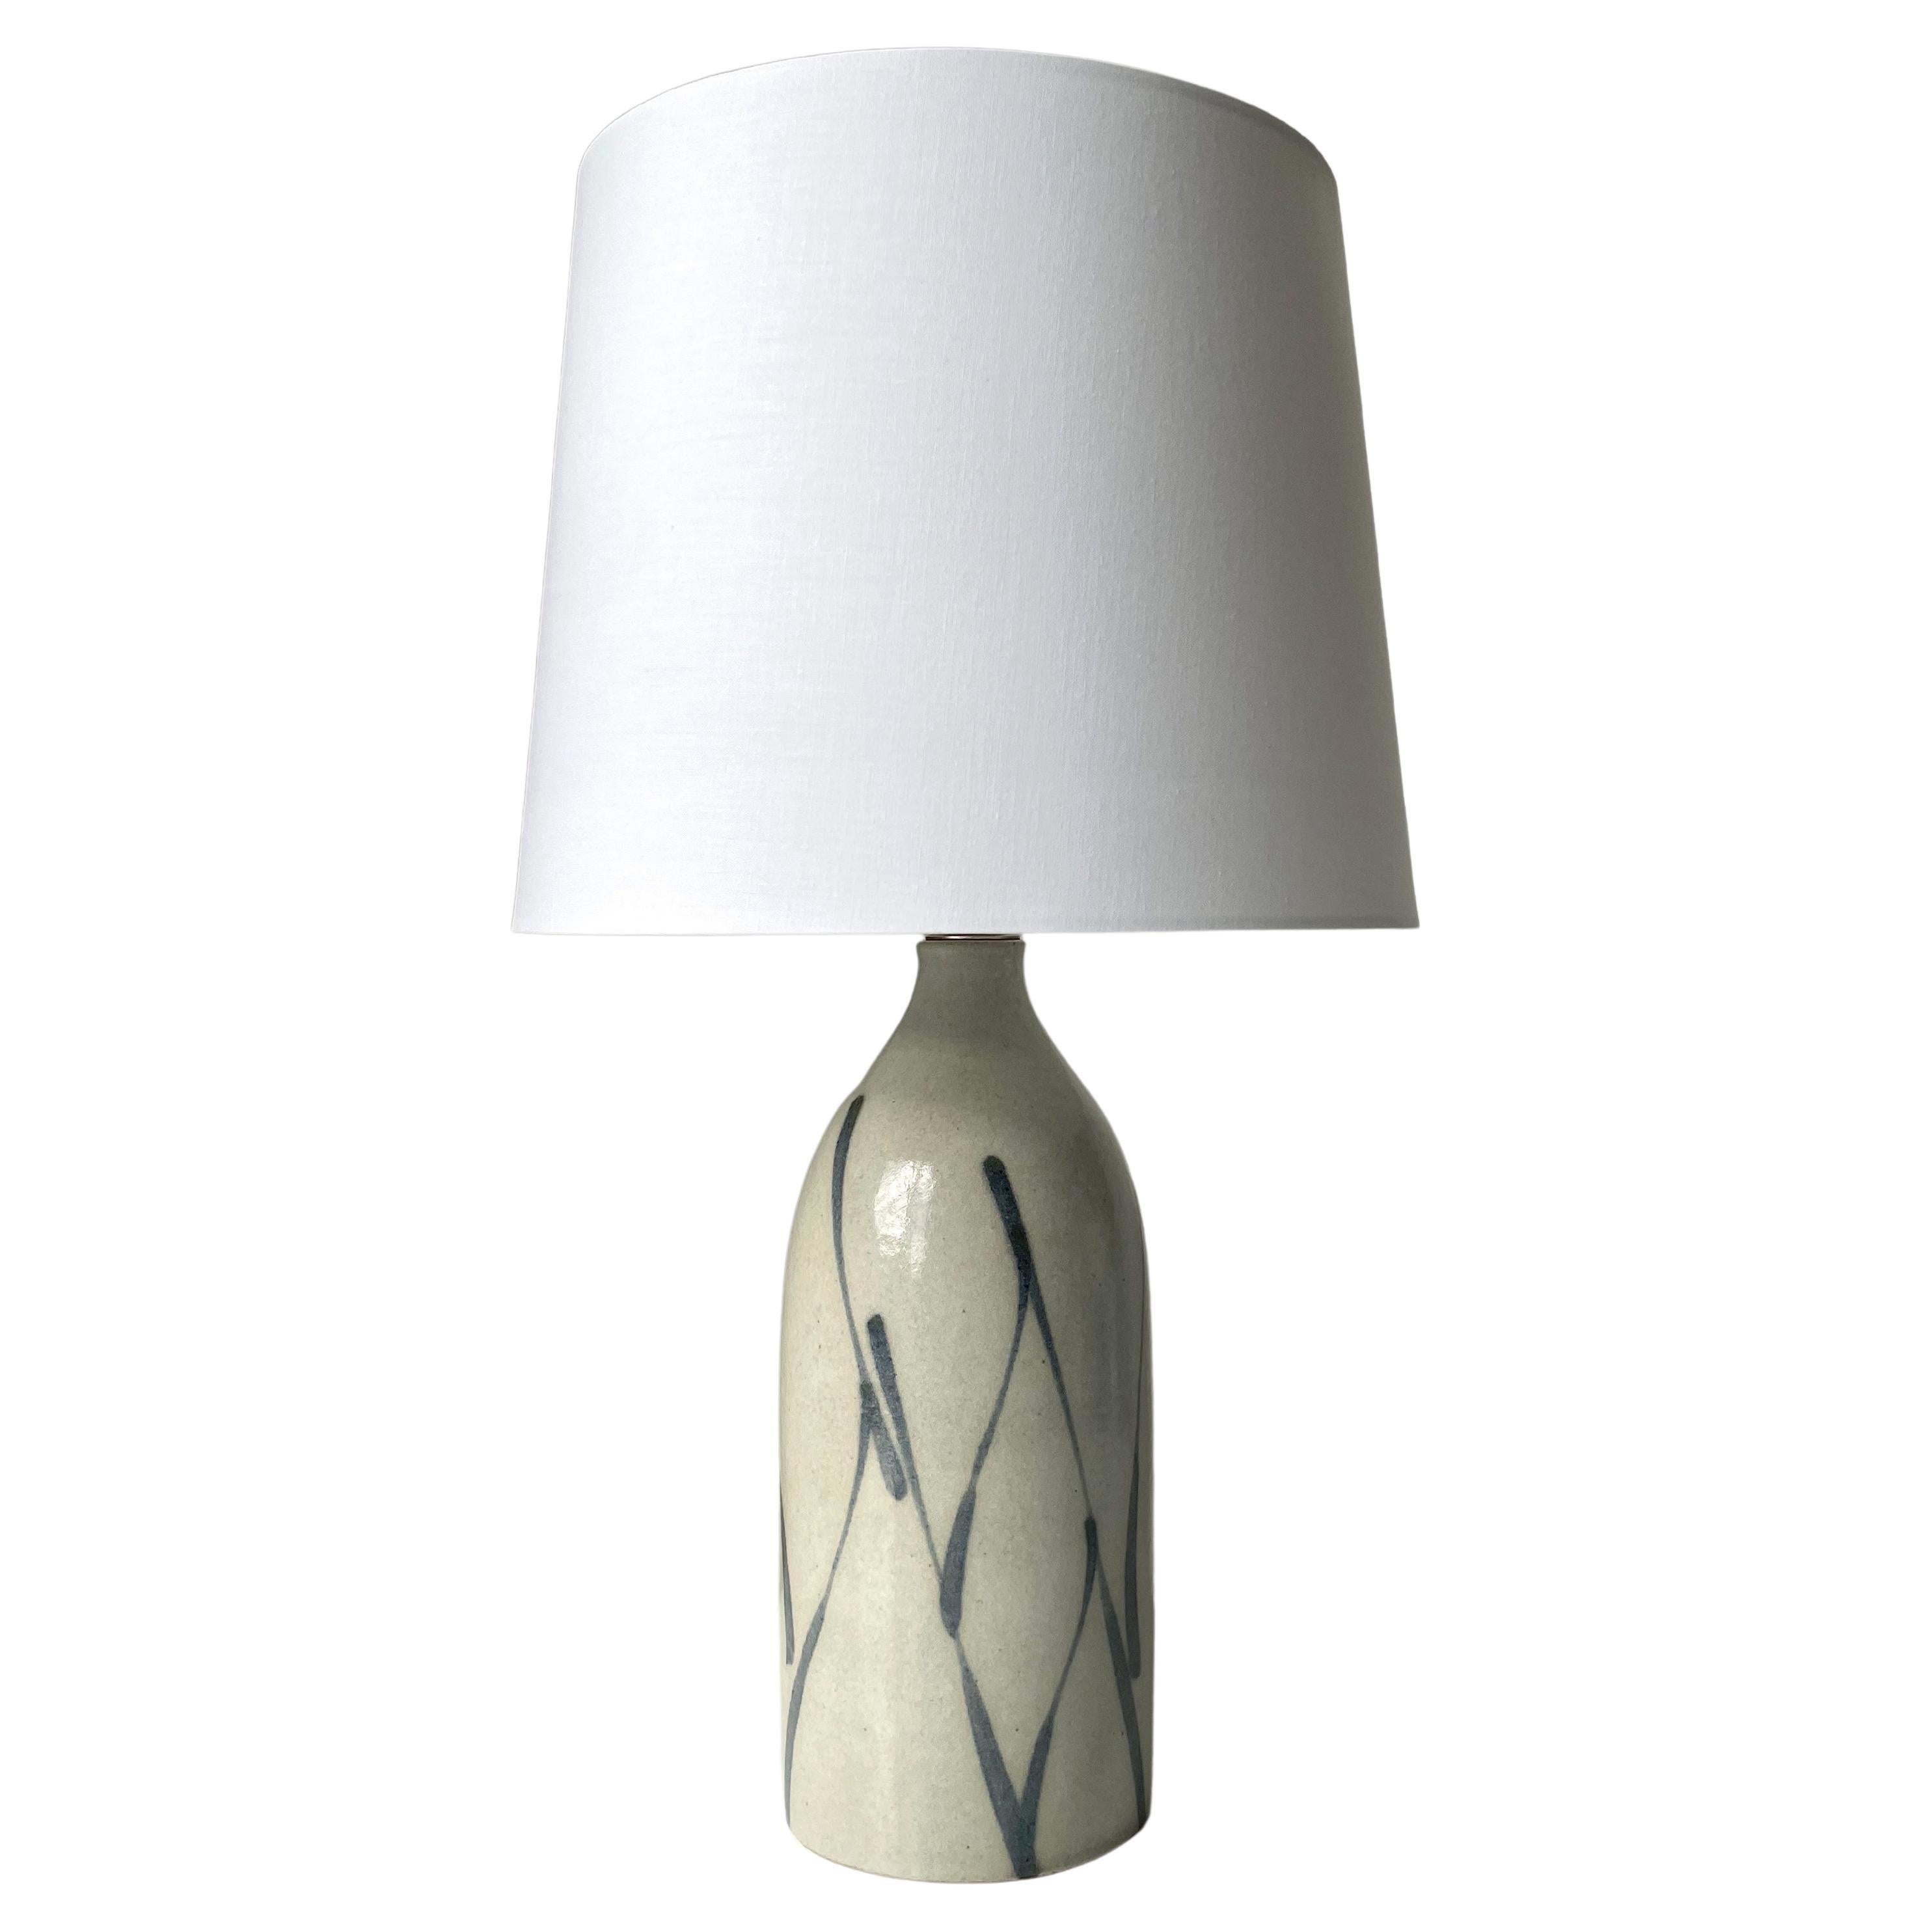 Soft Lined Kähler Danish Modern Graphic Table Lamp, 1960s For Sale